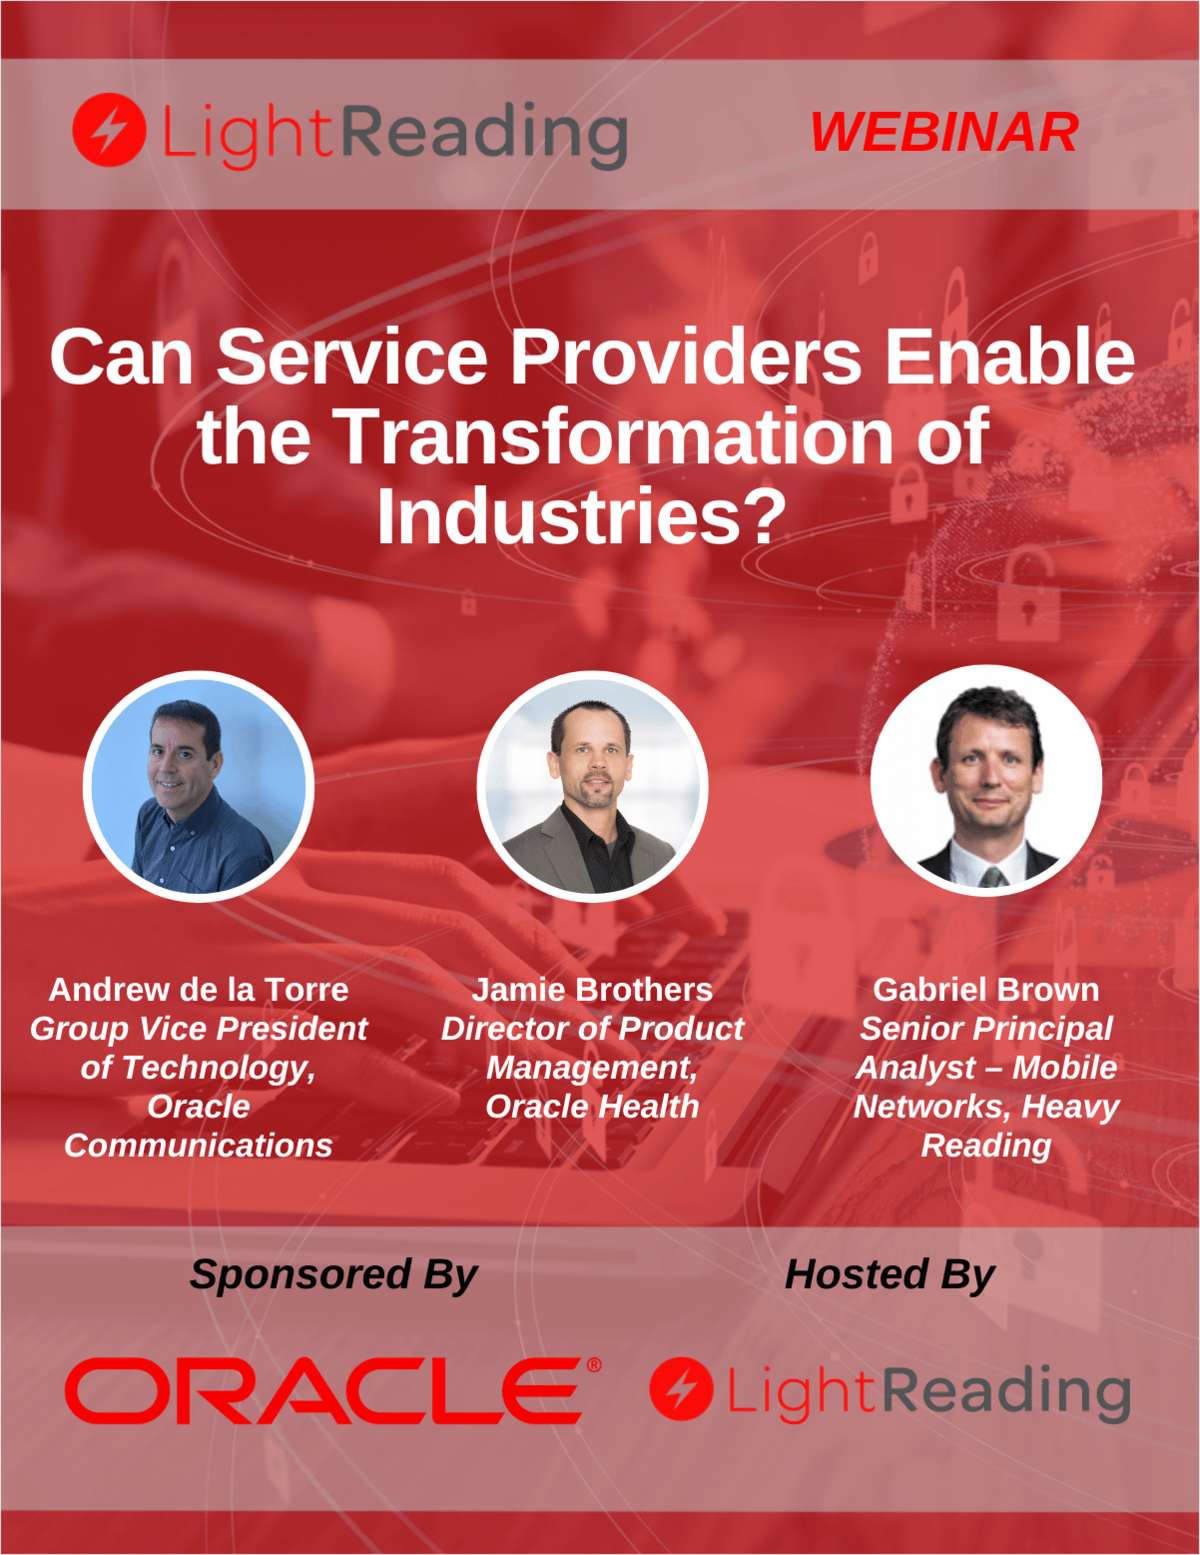 Can Service Providers Enable the Transformation of Industries?